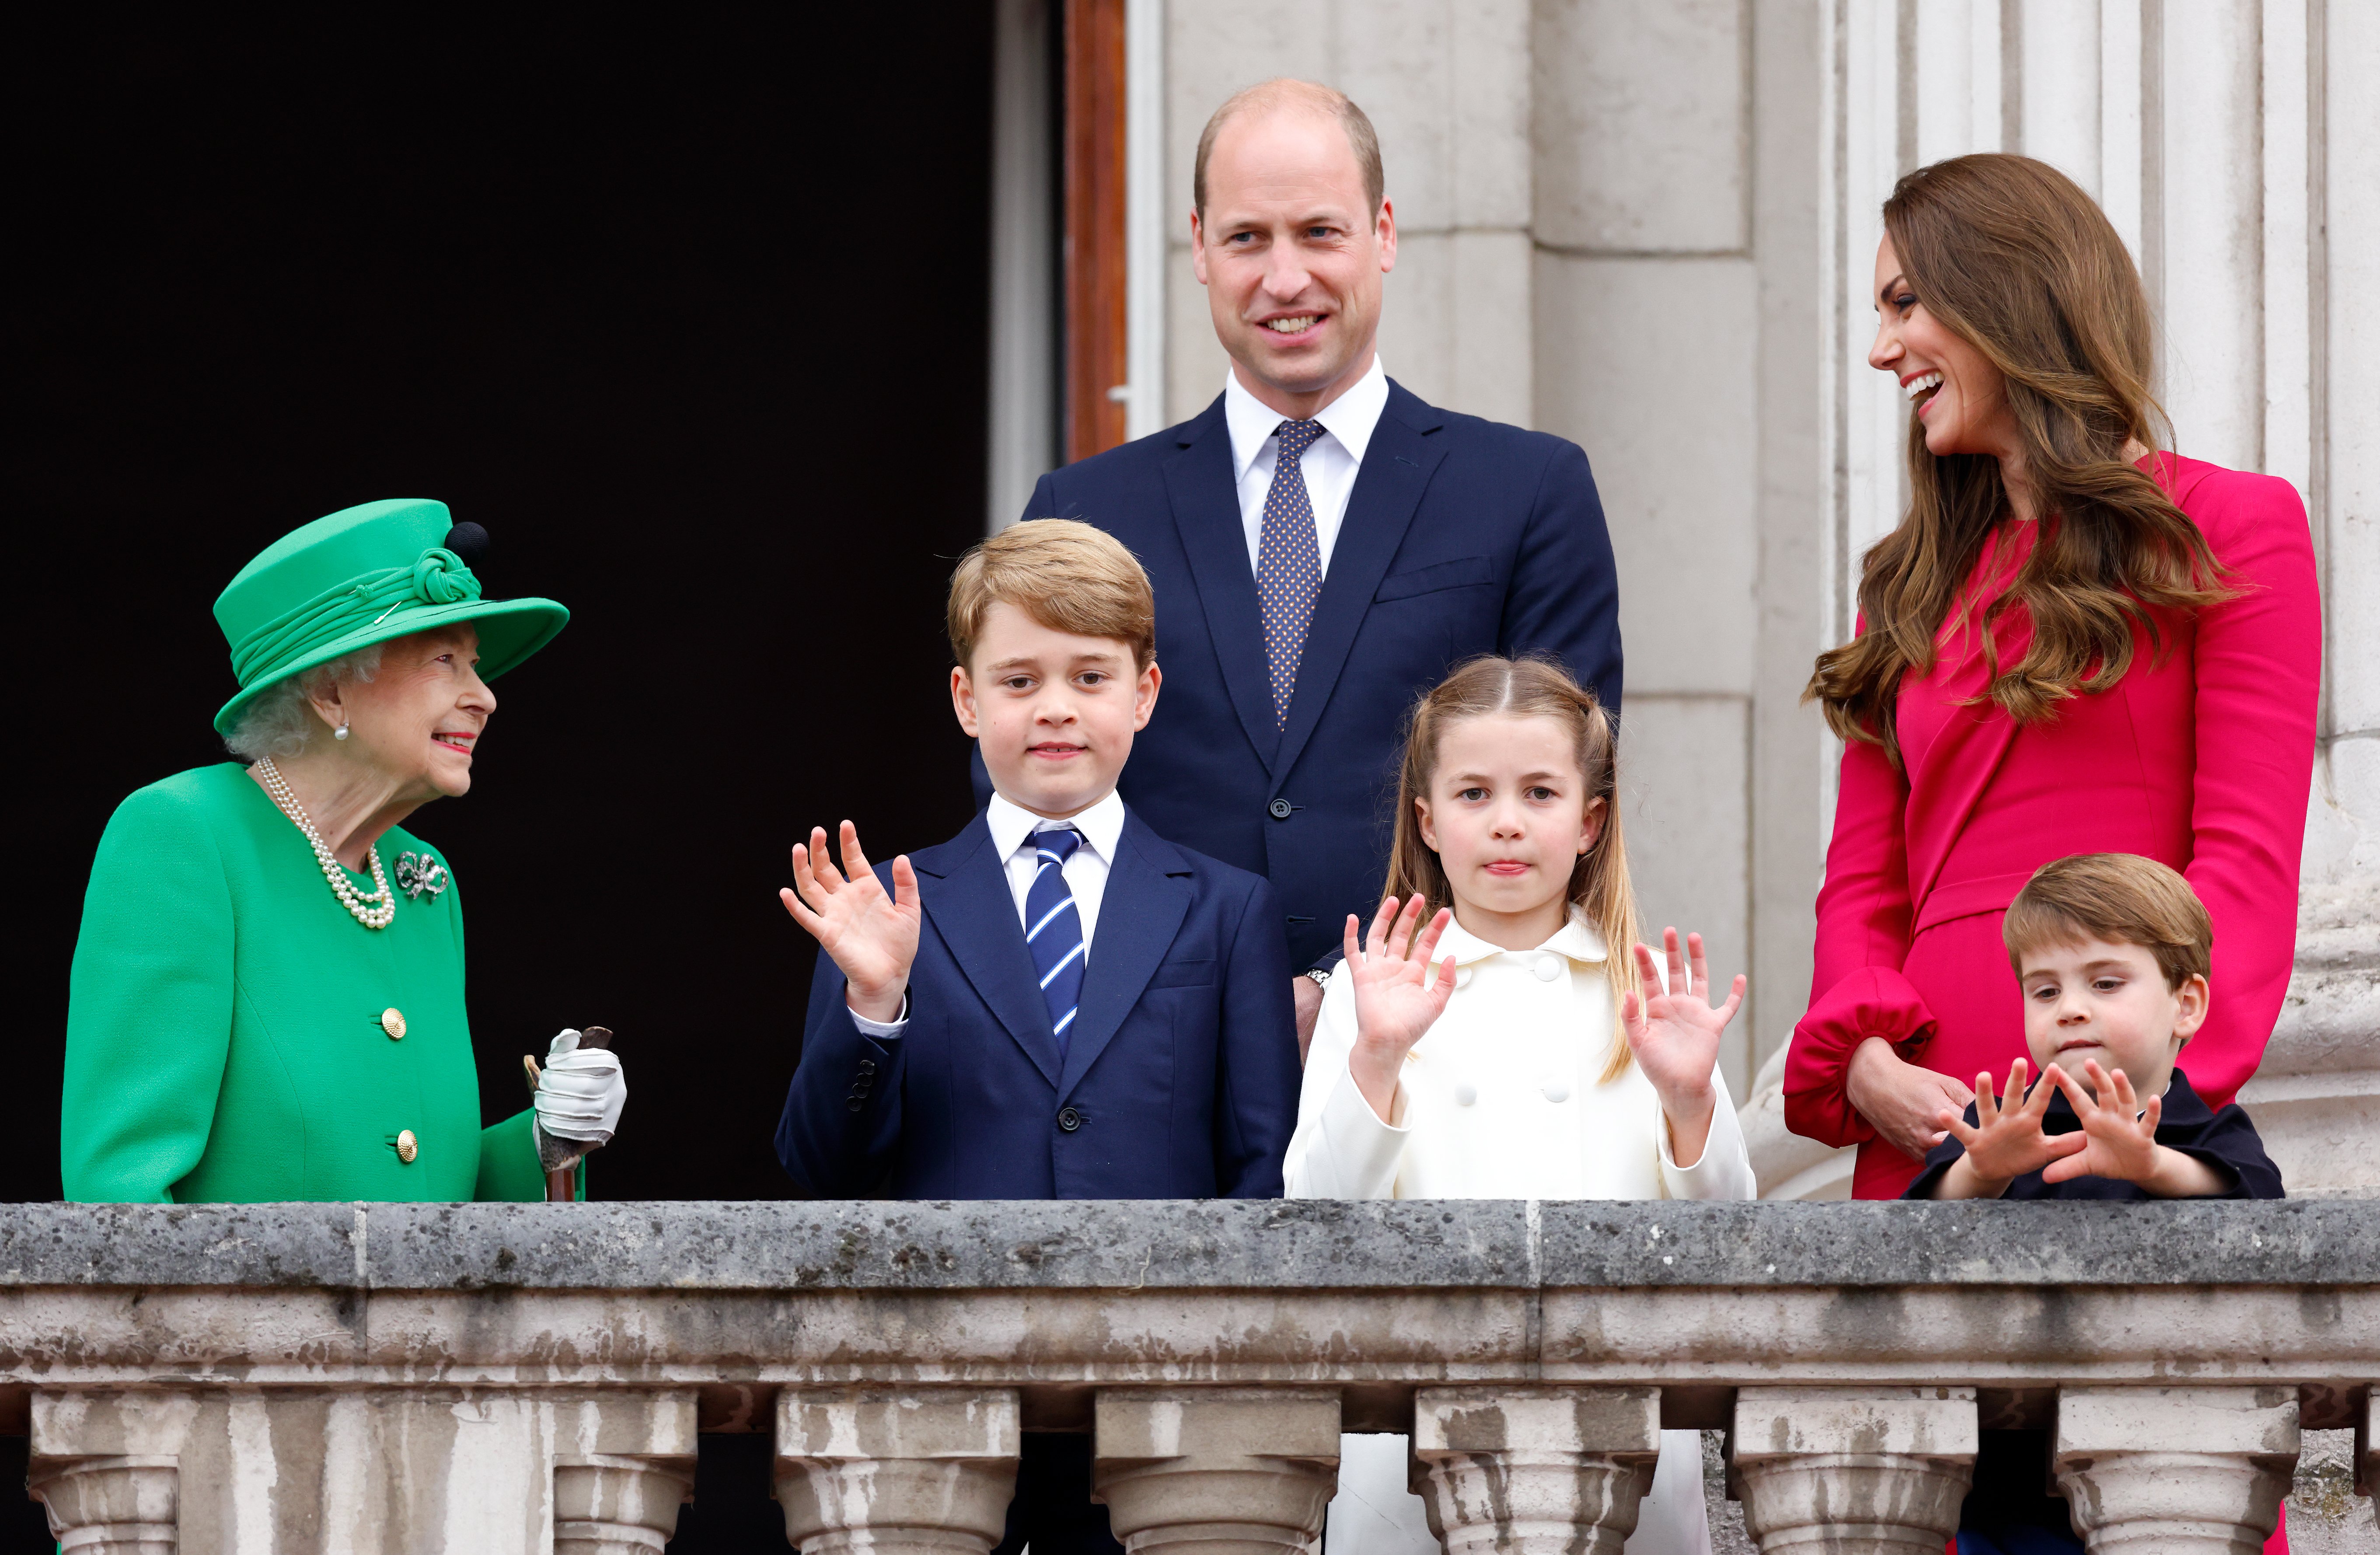 Queen Elizabeth II, Prince George, Prince William, Princess Charlotte, Catherine, and Prince Louis stand on the balcony of Buckingham Palace on June 5, 2022, in London, England. | Source: Getty Images